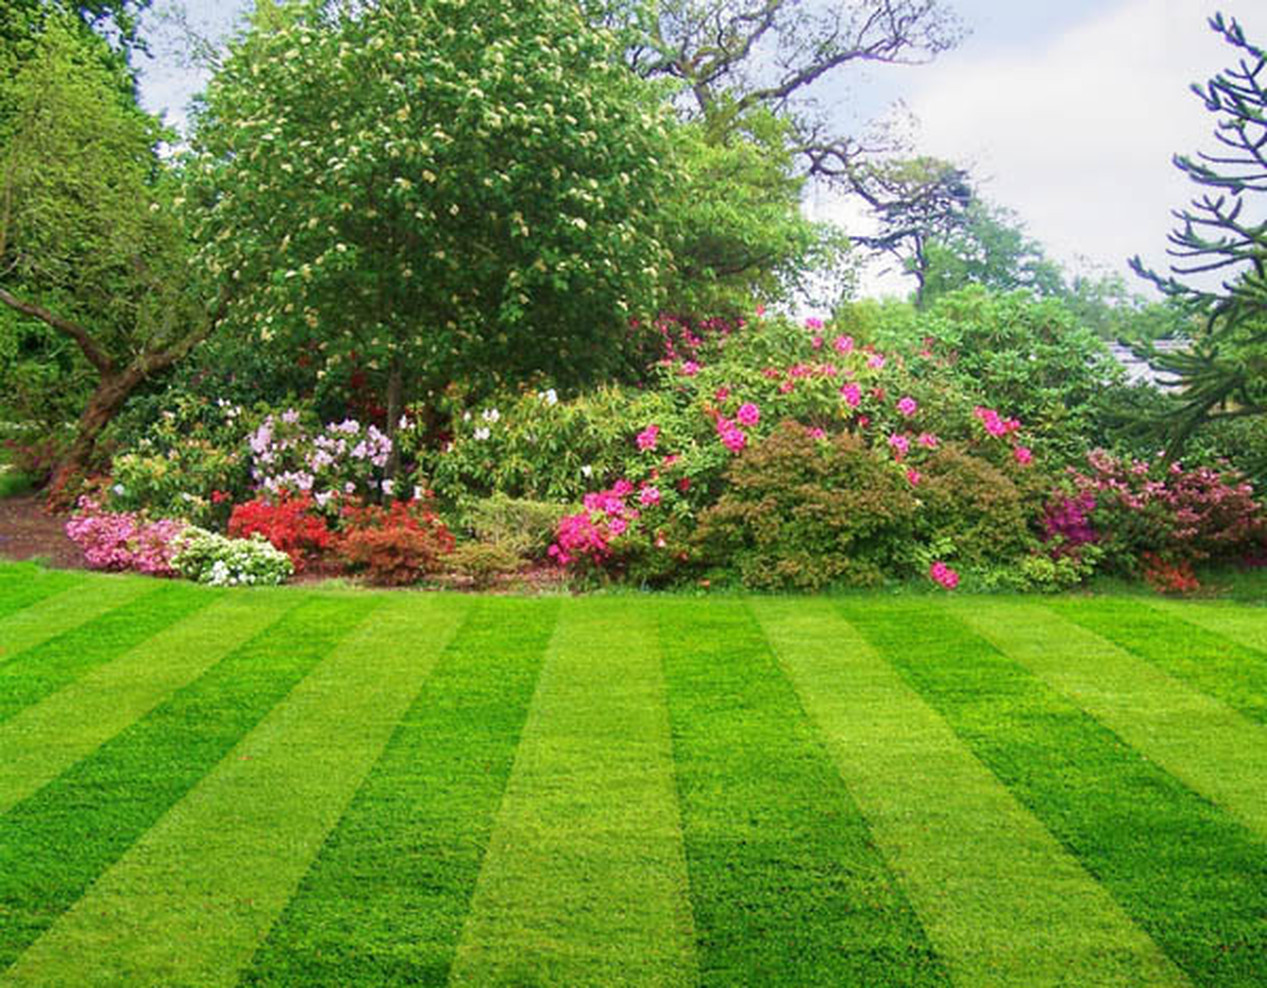 Landscape Designs & Tree Trimming | Lawn Stars Landscaping